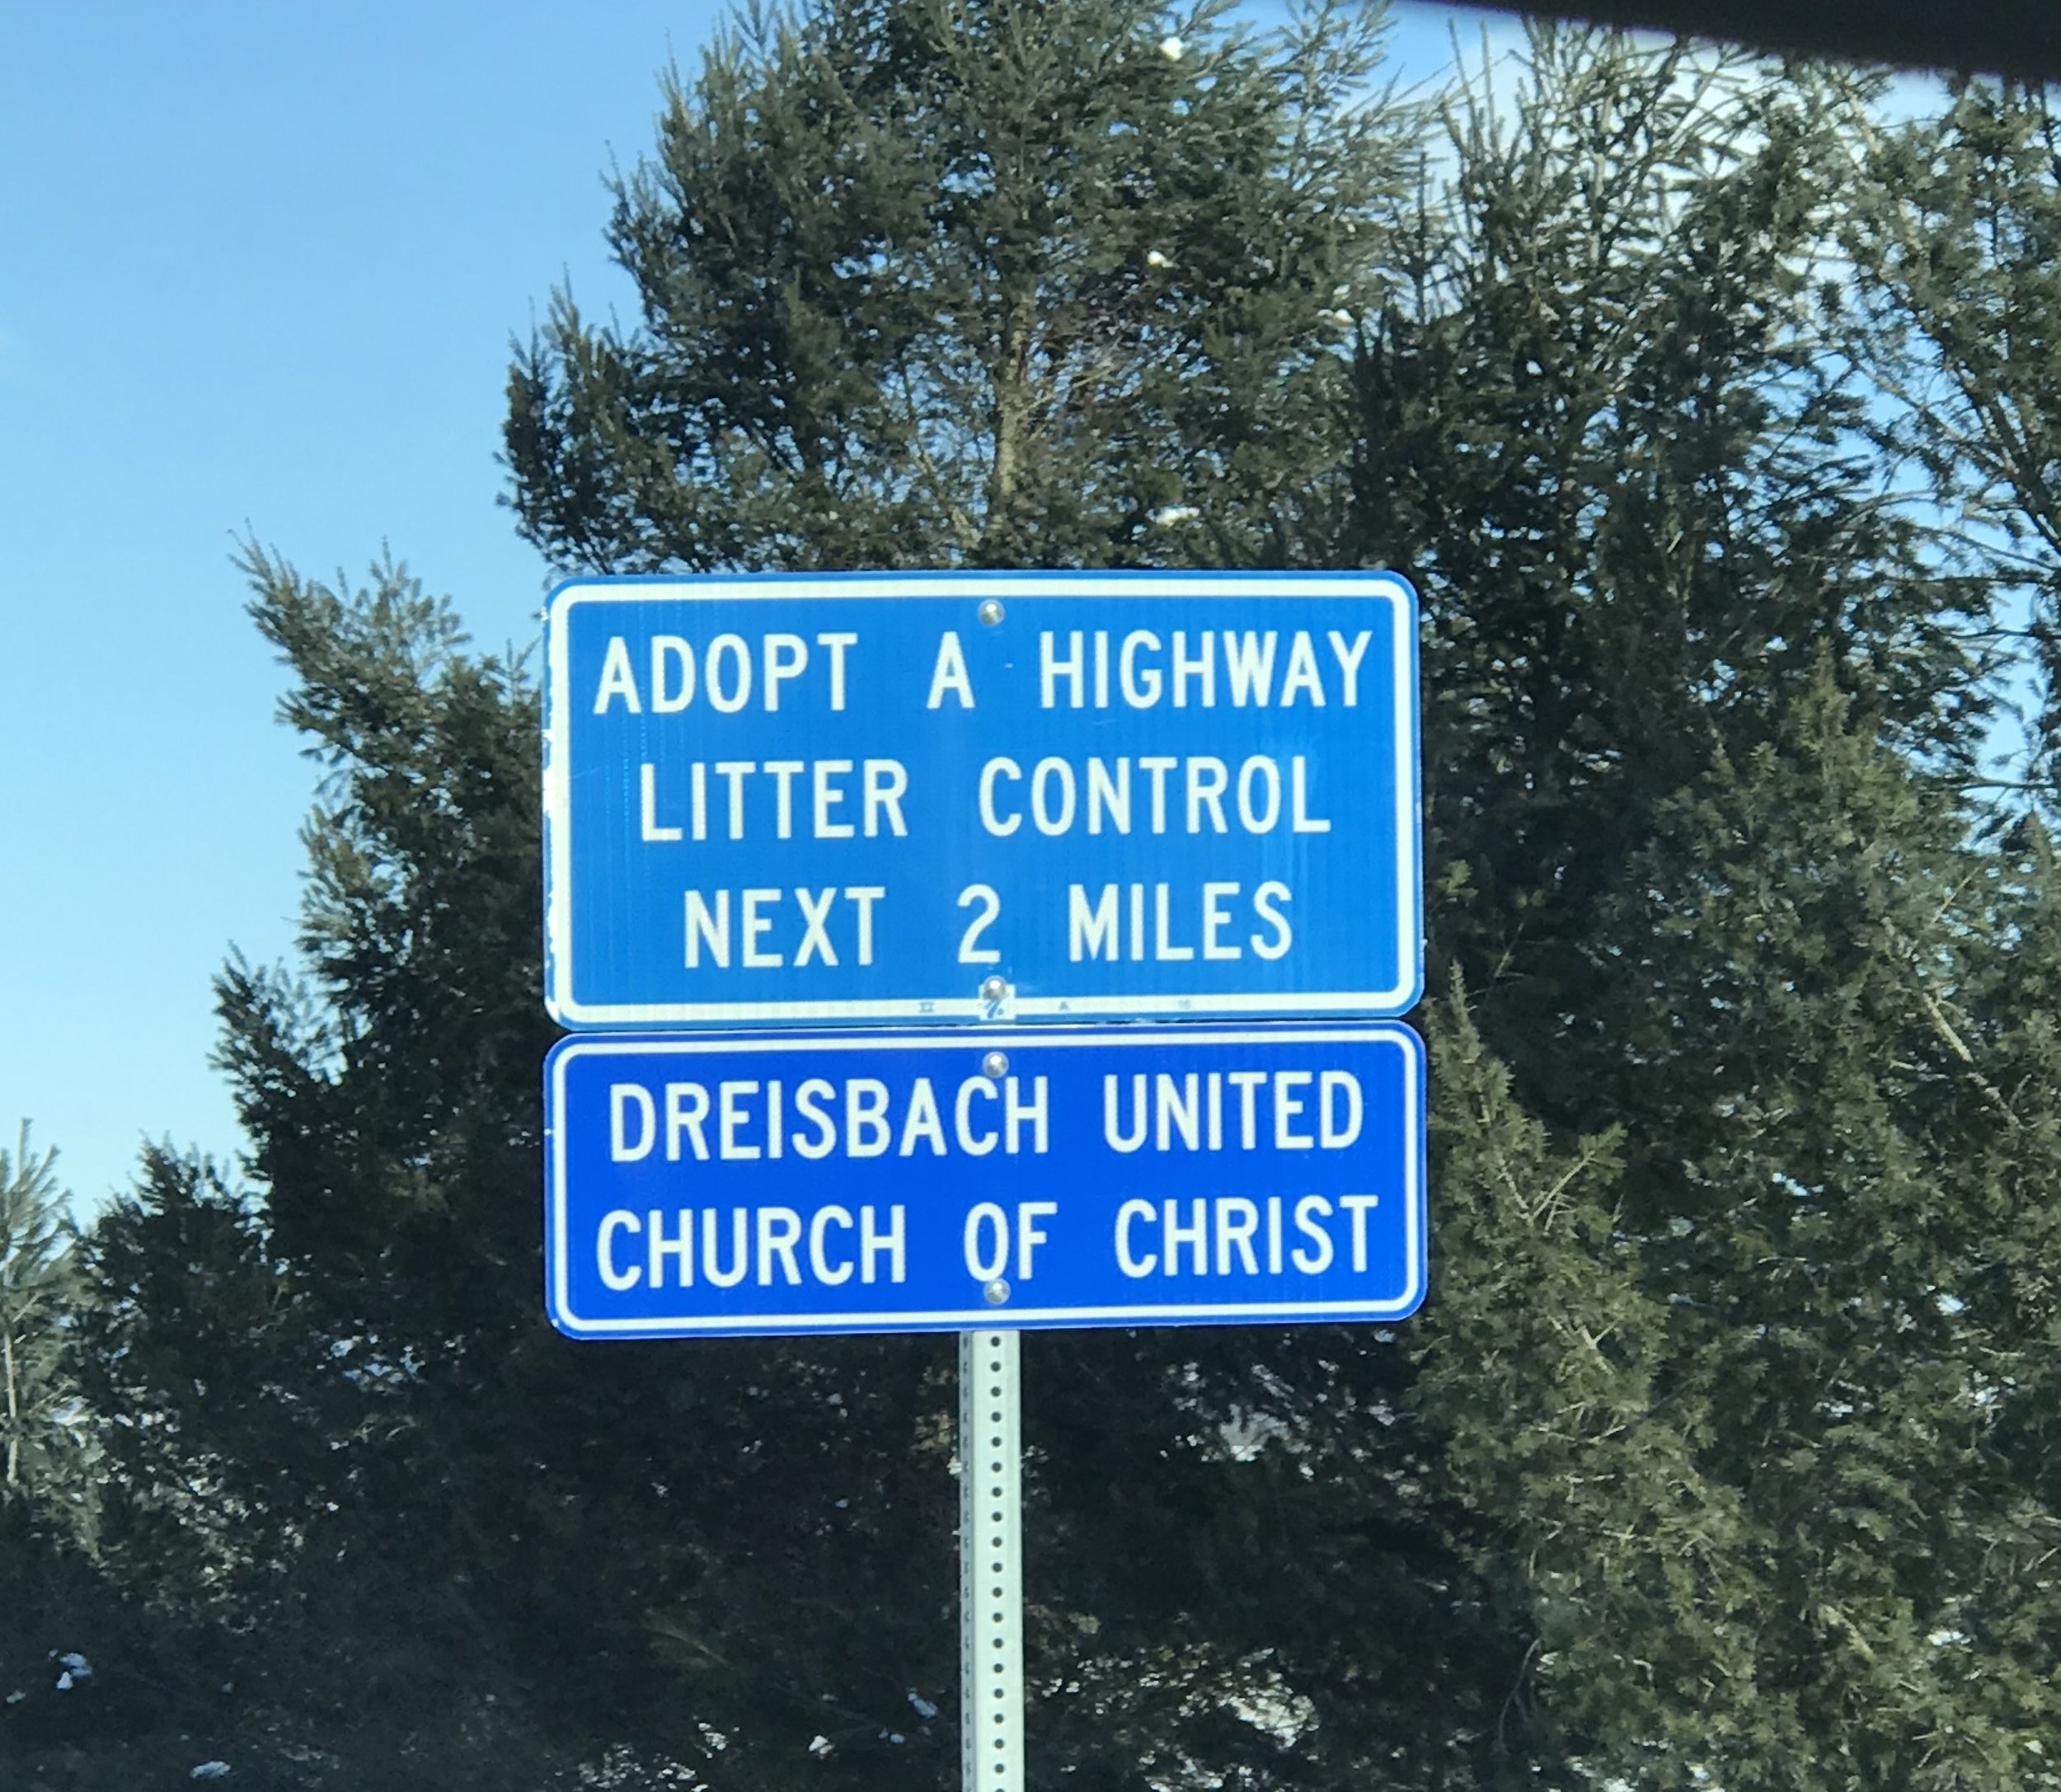 Adopt A Highway Ending Explained, Summary, Trailer, and More - News